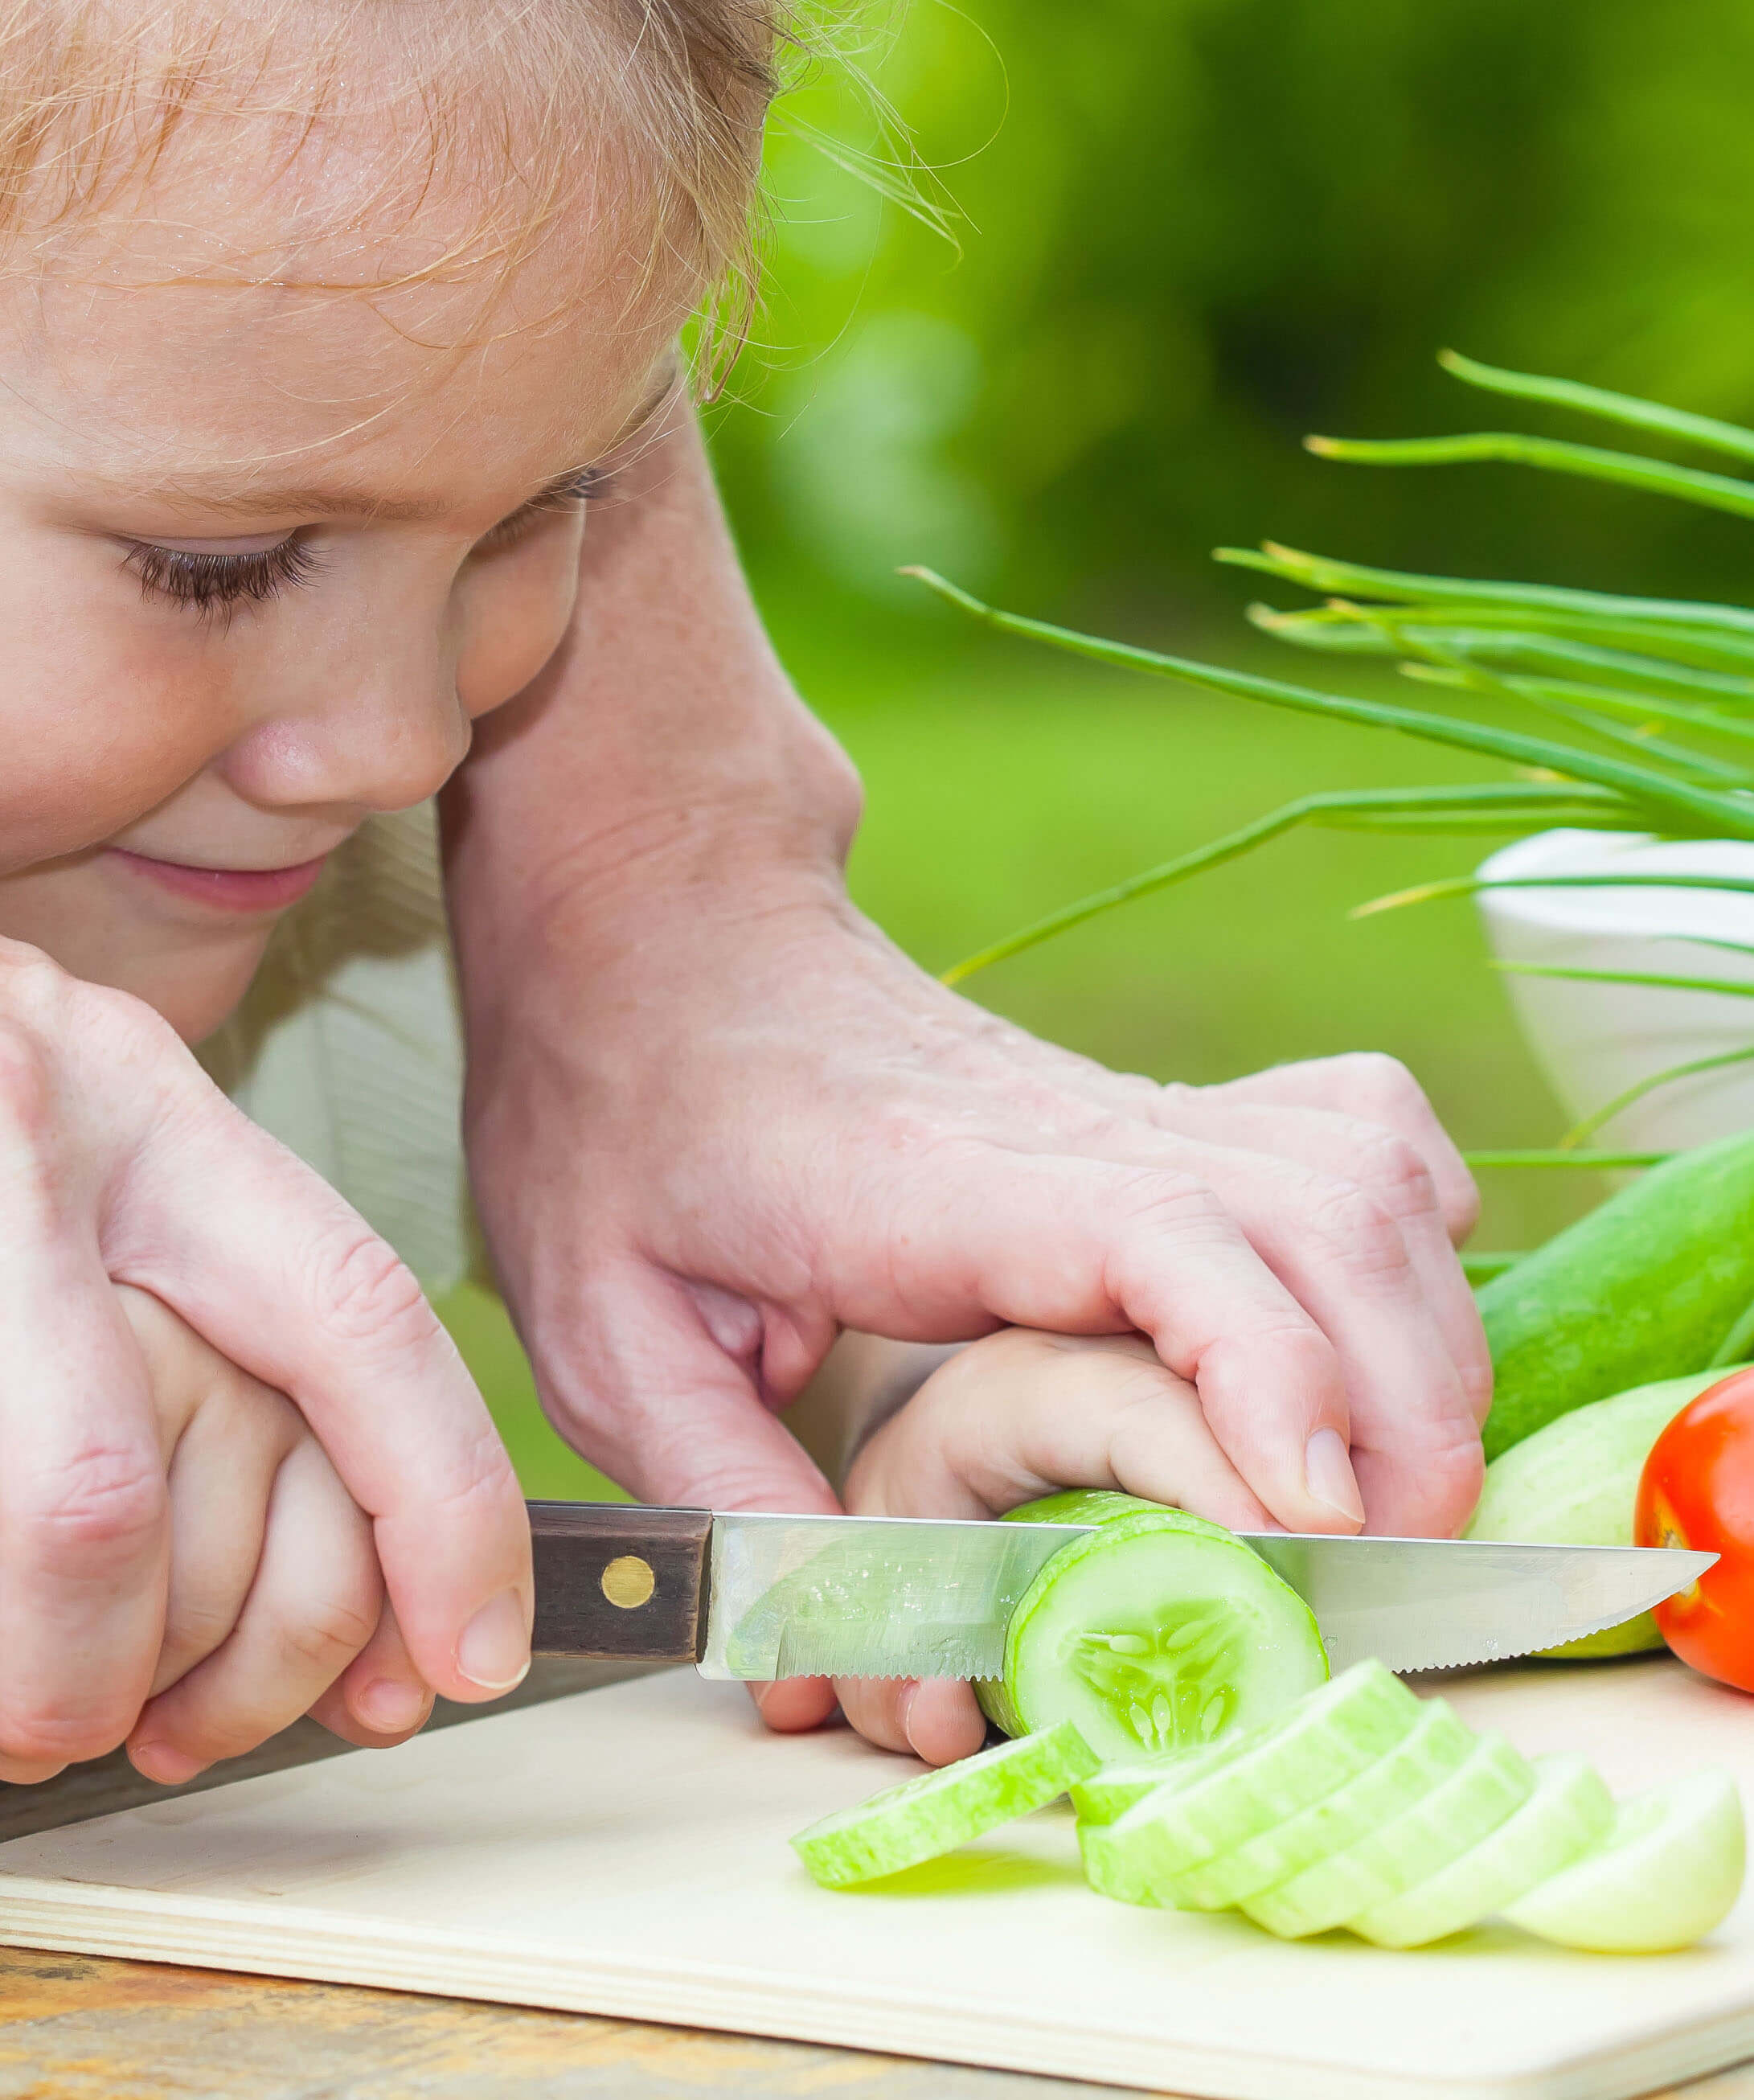 How to Get Kids Interested in Healthy Foods